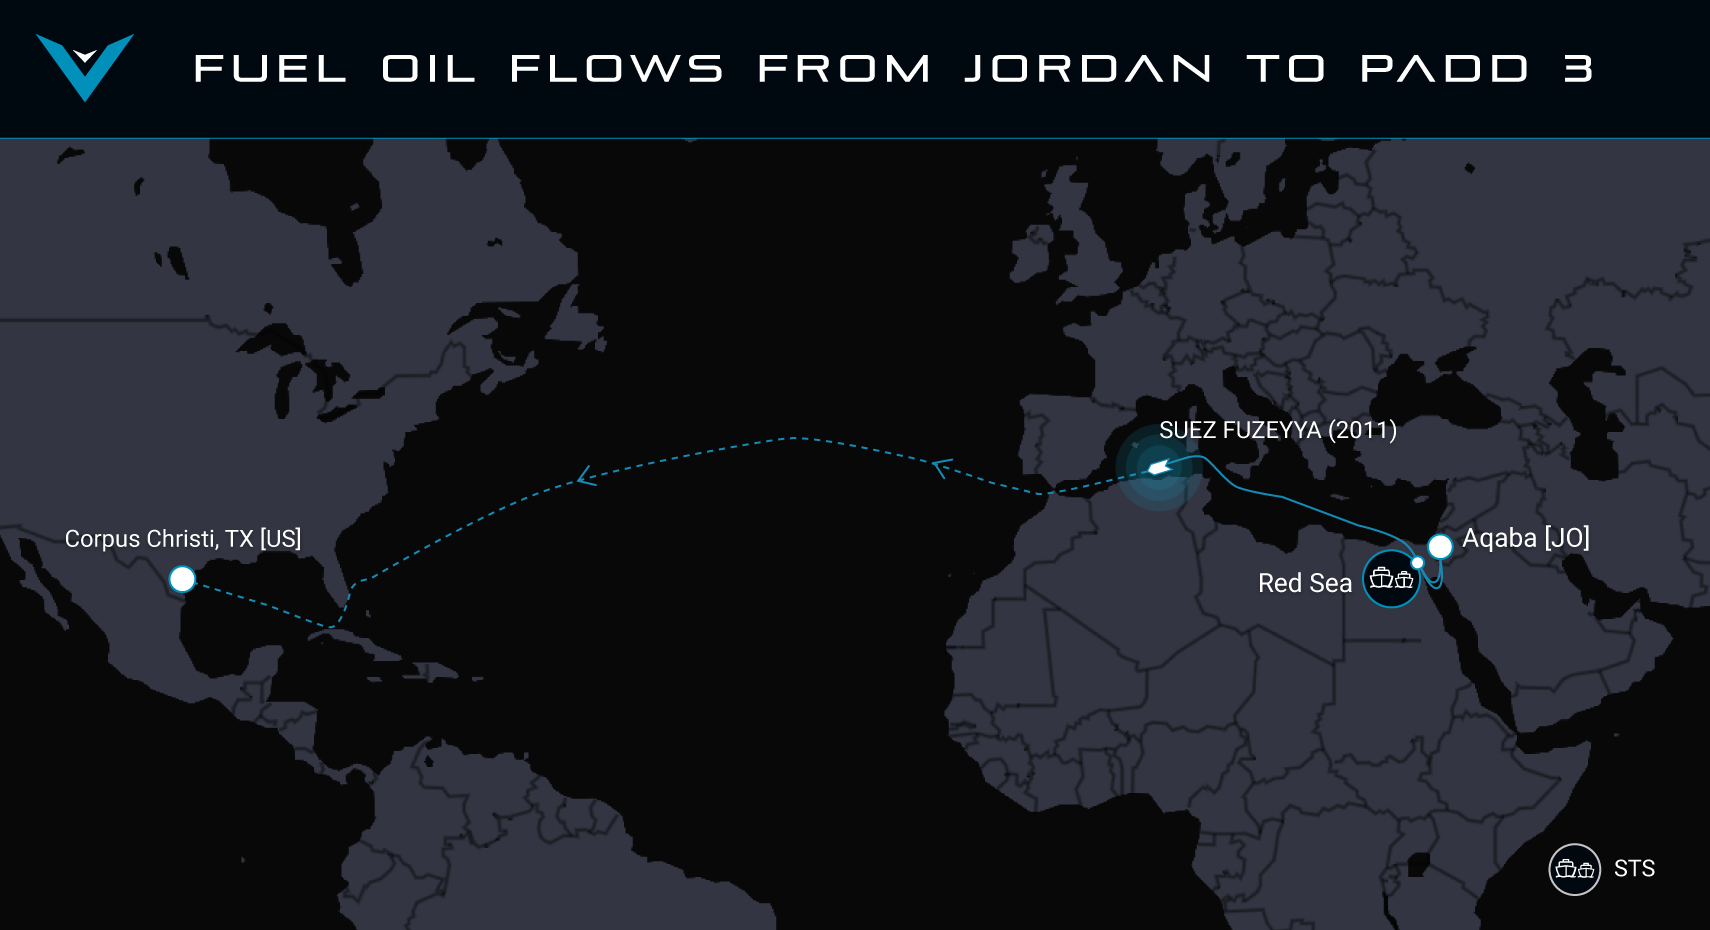 Fuel-oil-flows-from-Jordan-to-PADD-3